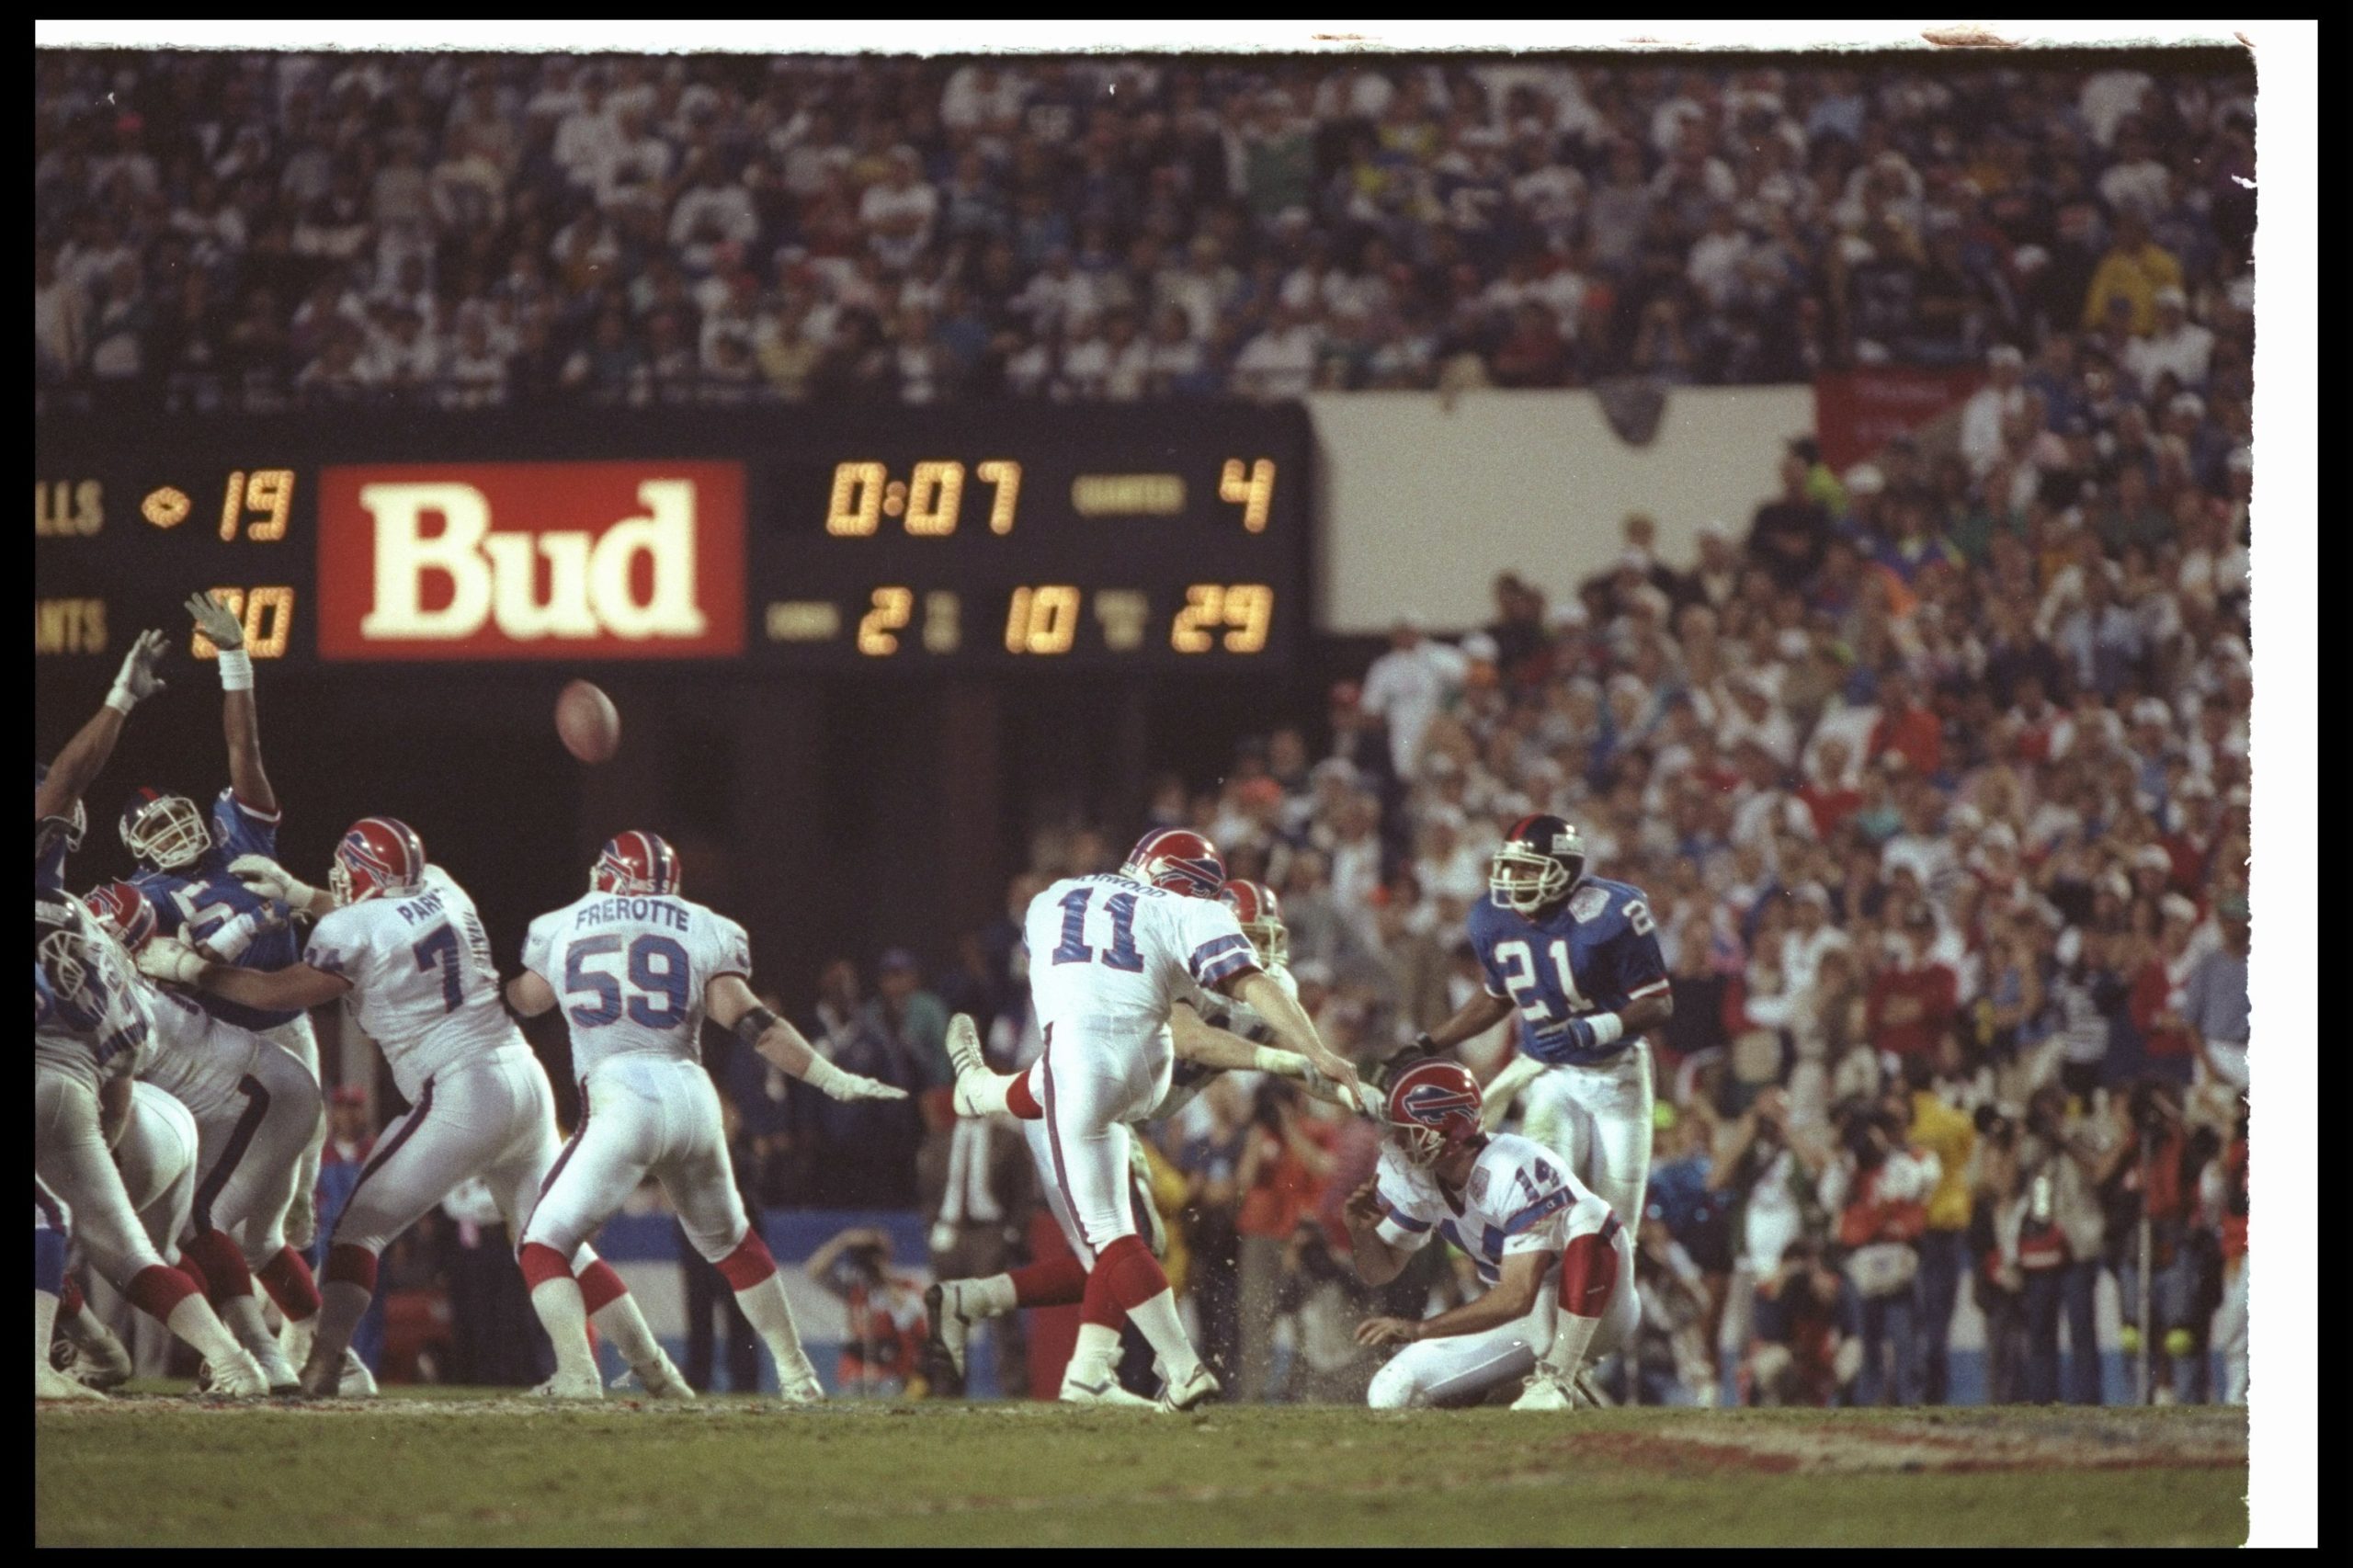 12 Jan 1991: Kicker Scott Norwood #11 of the Buffalo Bills misses a 47-yard field goal wide right at the end of regulation during Super Bowl XXV against the New York Giants at Tampa Stadium in Tampa, Florida. The Giants won the game, 20-19.